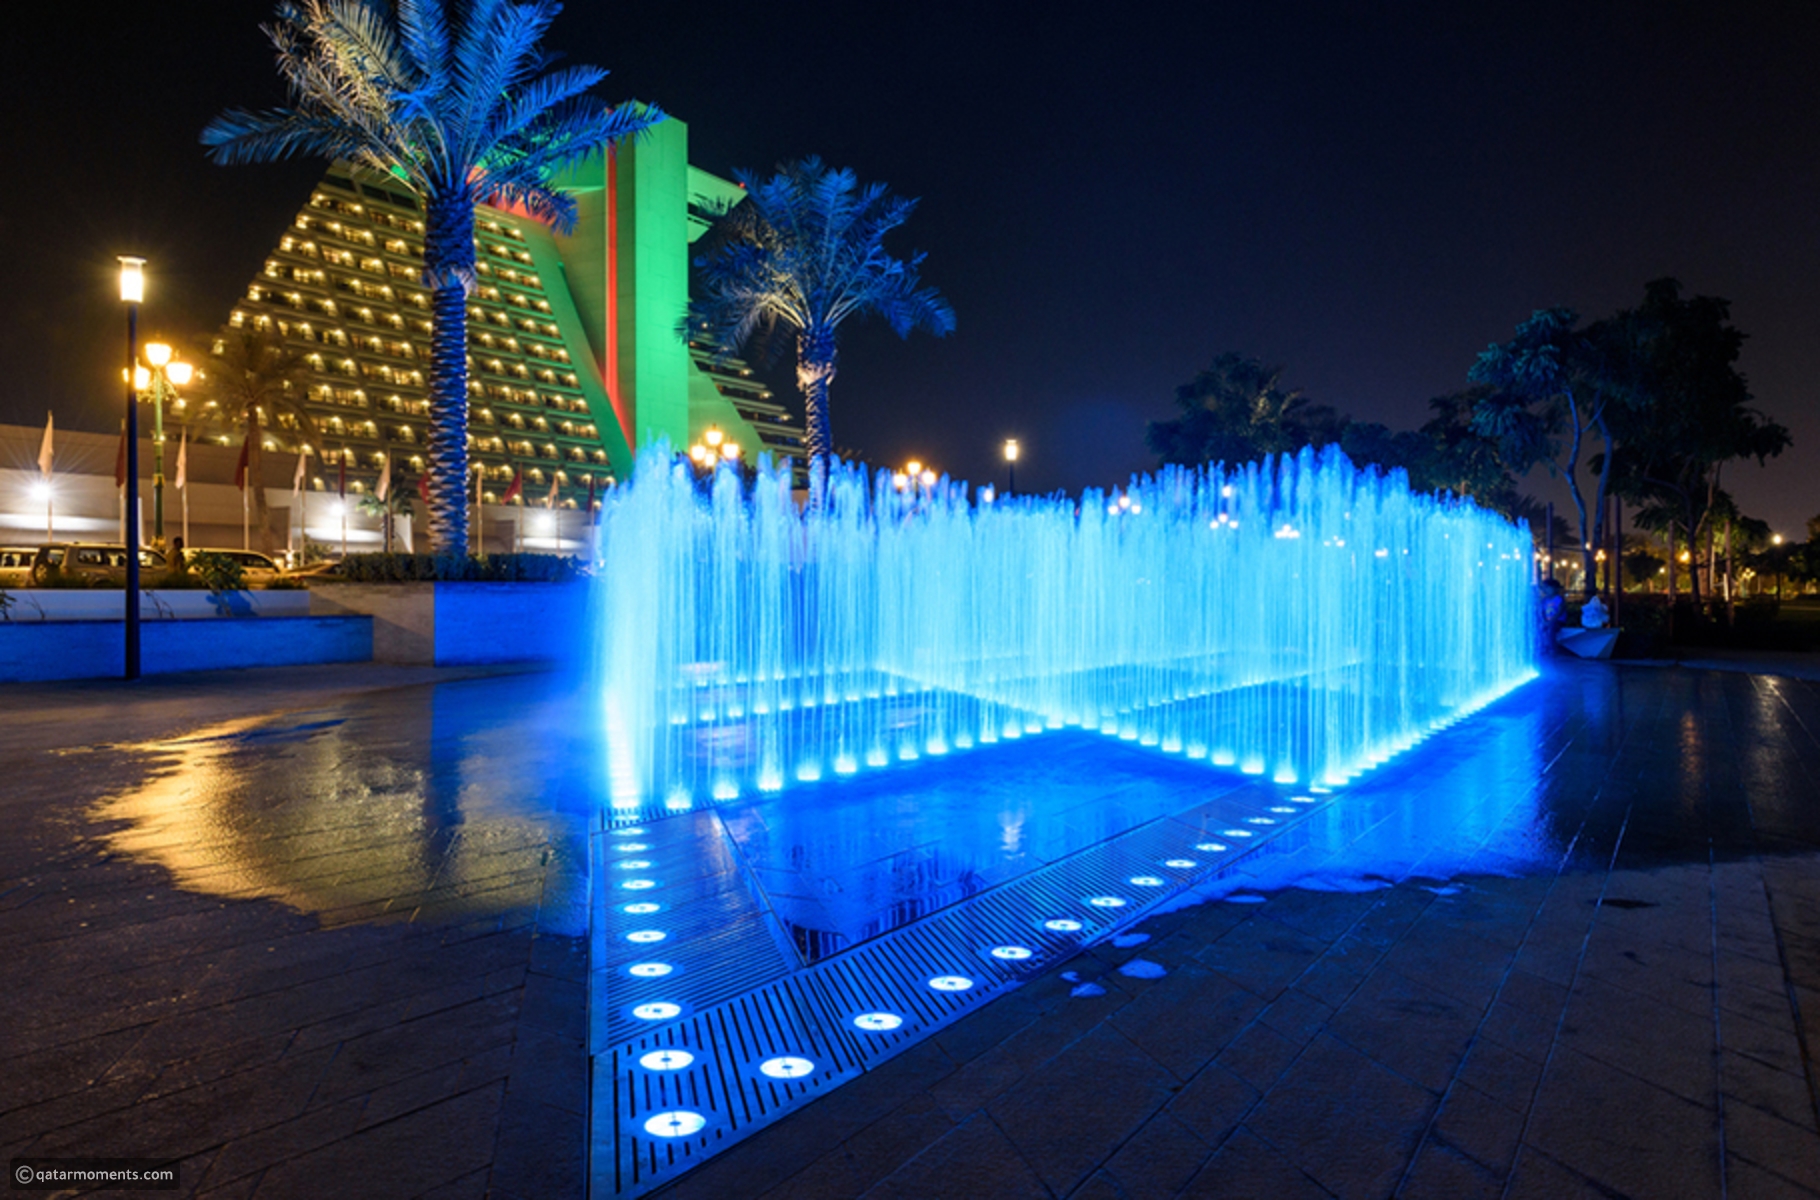 free water attractions, fountains and more for kids in qatar